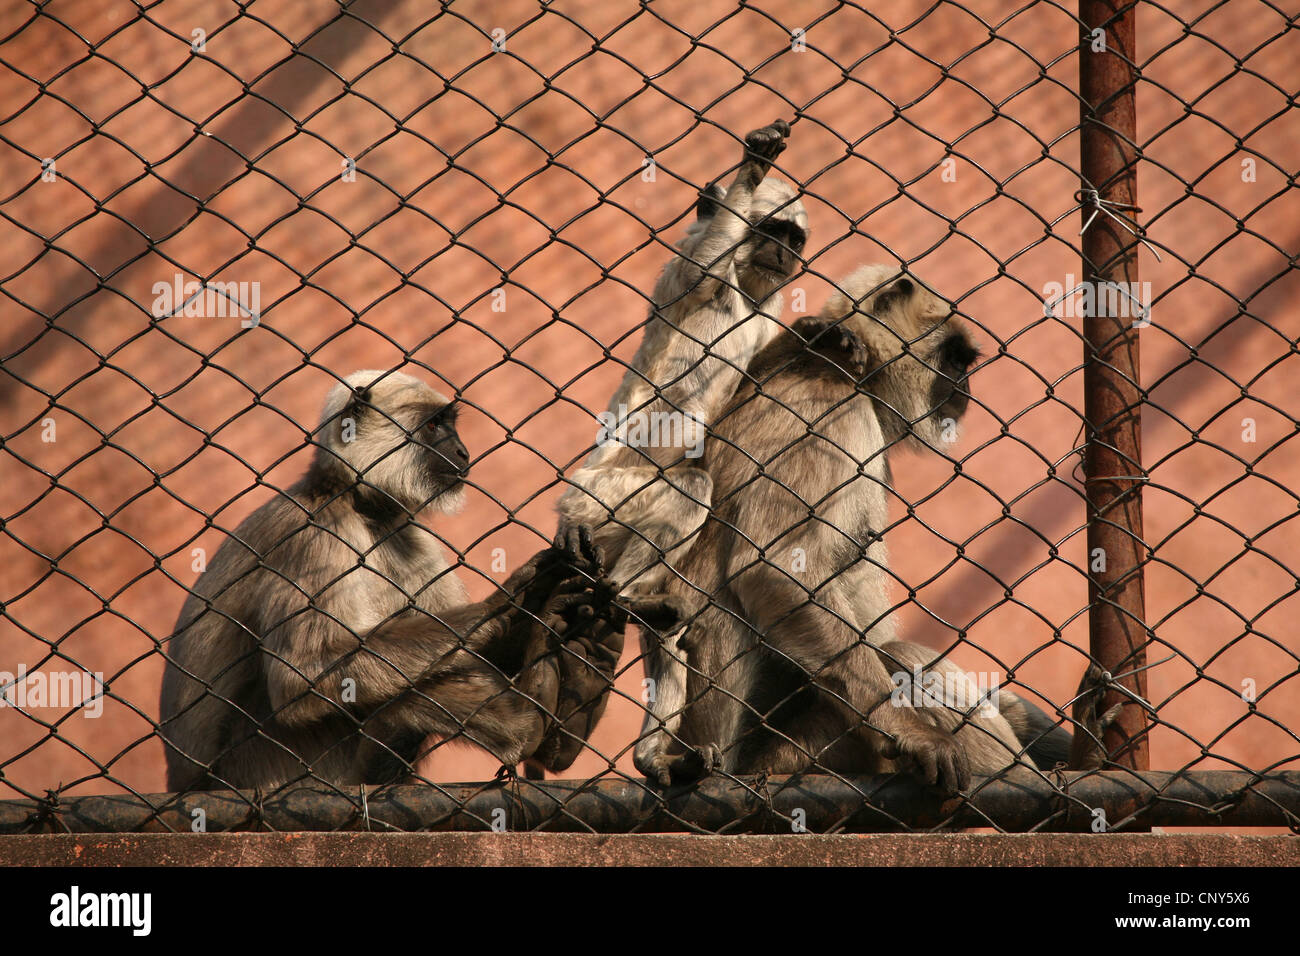 Nepal gray langurs (Semnopithecus schistaceus) at the Central Zoo in Kathmandu, Nepal. Stock Photo